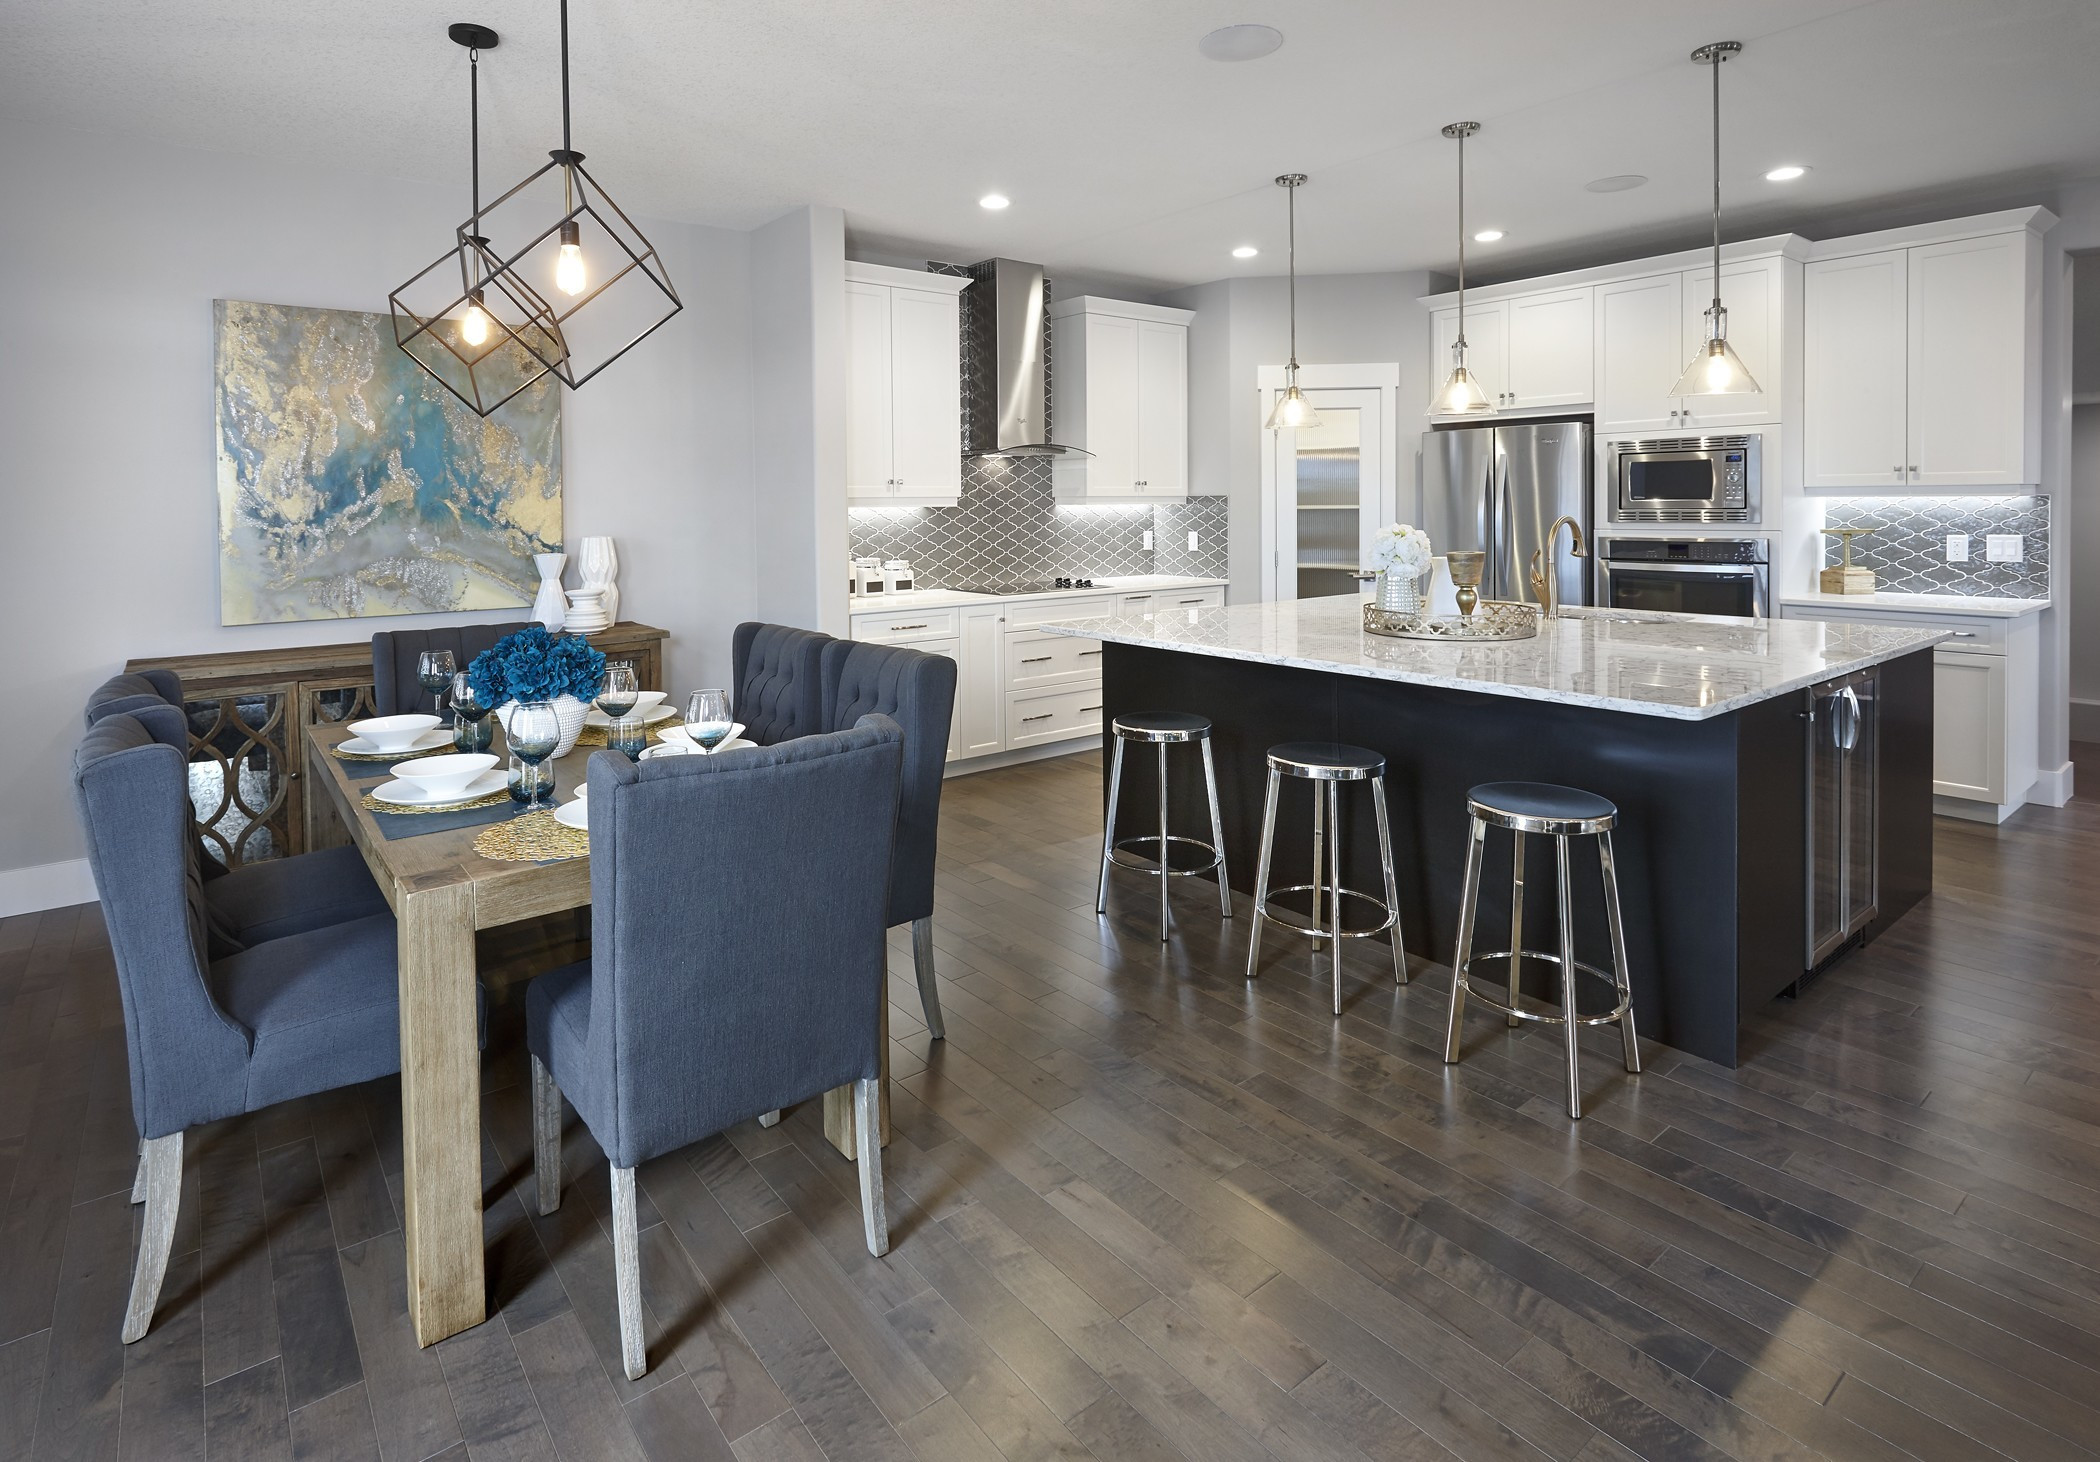 Premier Hardwood Floors and Contracting Co Llc Of Signature Lighting and Fans Lighting and Fans In Calgary Pertaining to Keswick Cameronhomes thesophiaii Im052 07